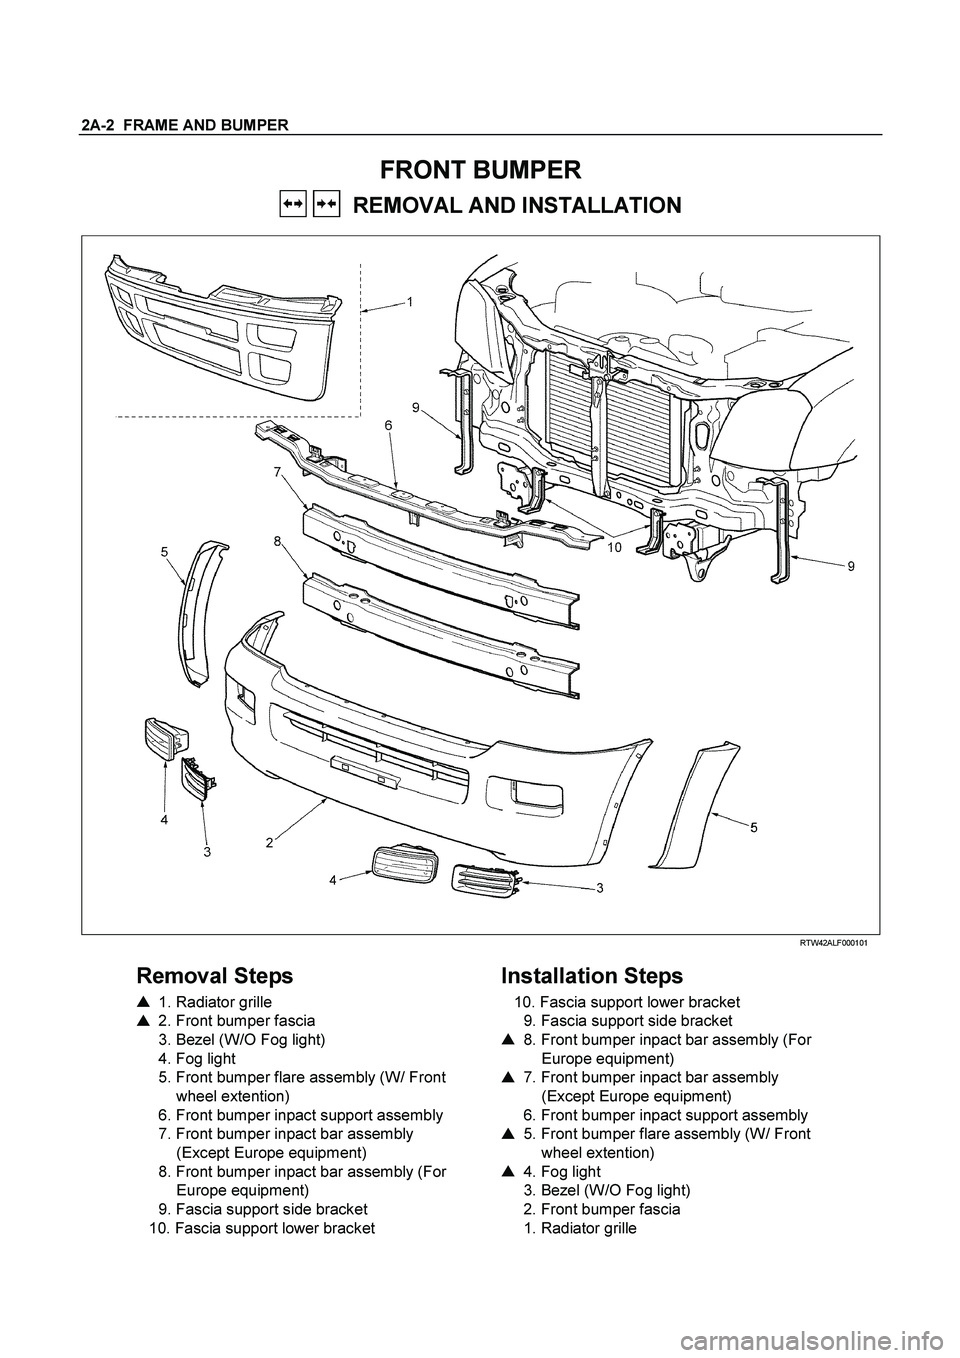 ISUZU TF SERIES 2004  Workshop Manual 2A-2  FRAME AND BUMPER 
FRONT BUMPER 
   REMOVAL AND INSTALLATION 
  
 
 RTW42ALF000101 
 
Removal Steps   

 
1. Radiator grille 
 
2. Front bumper fascia 
 
3. Bezel (W/O Fog light) 
 
4. Fog ligh